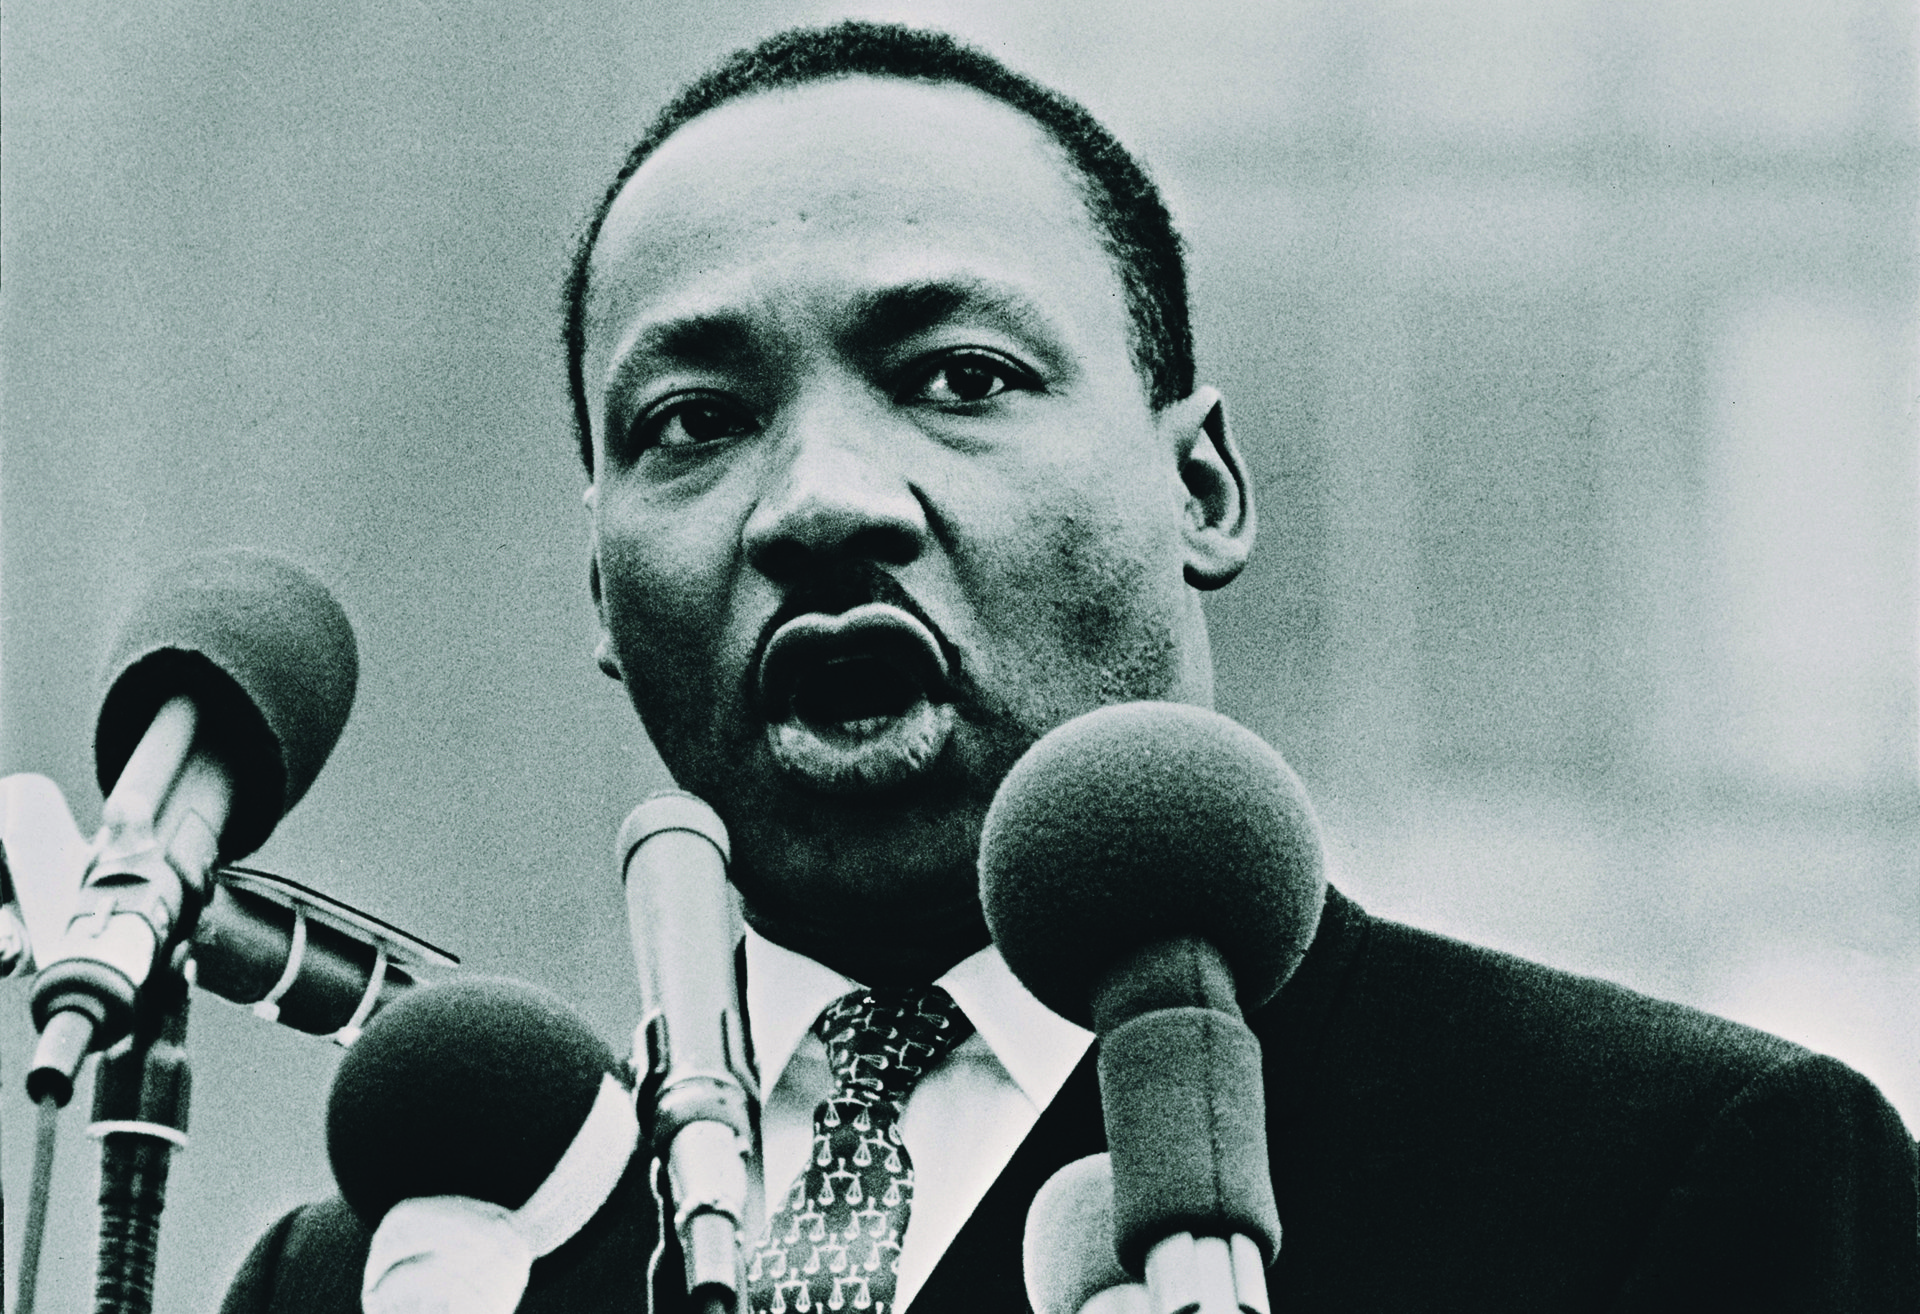 Martin Luther King Jr. Speech: 'The Three Evils' - The ...